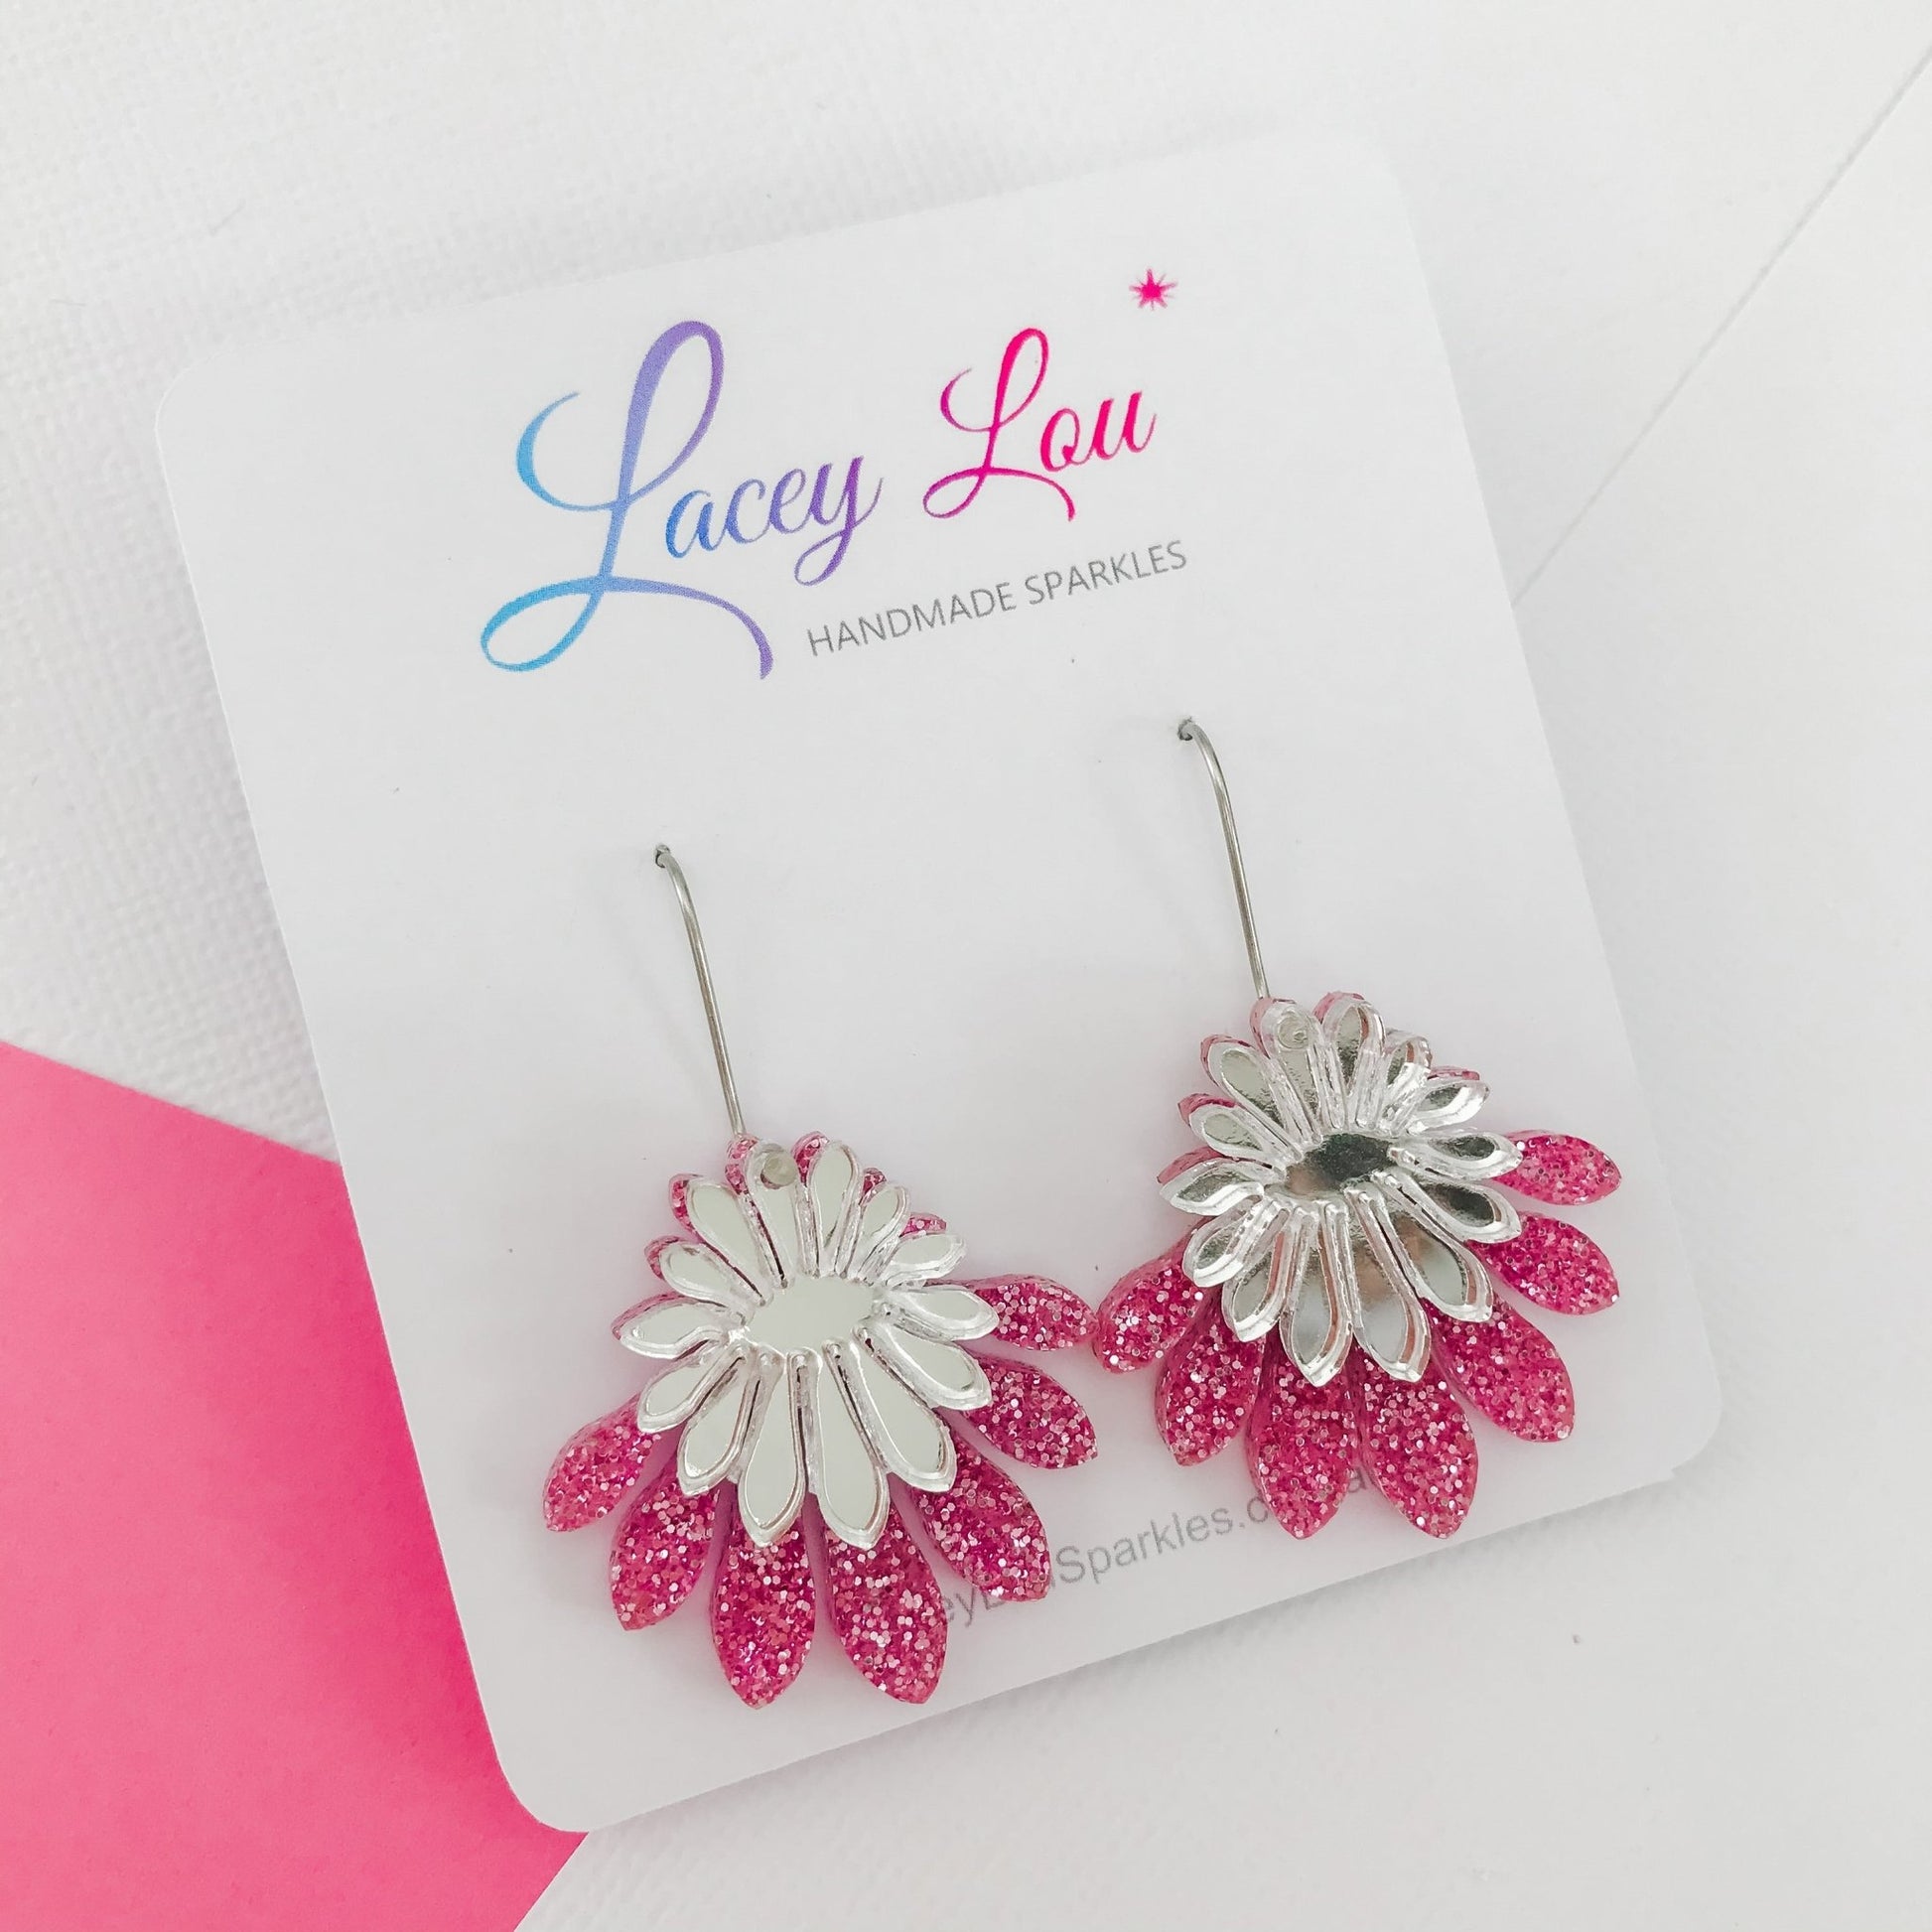 Medium Flower Frill Statement Dangle - Silver and pink glitter - Lacey Lou Sparkles